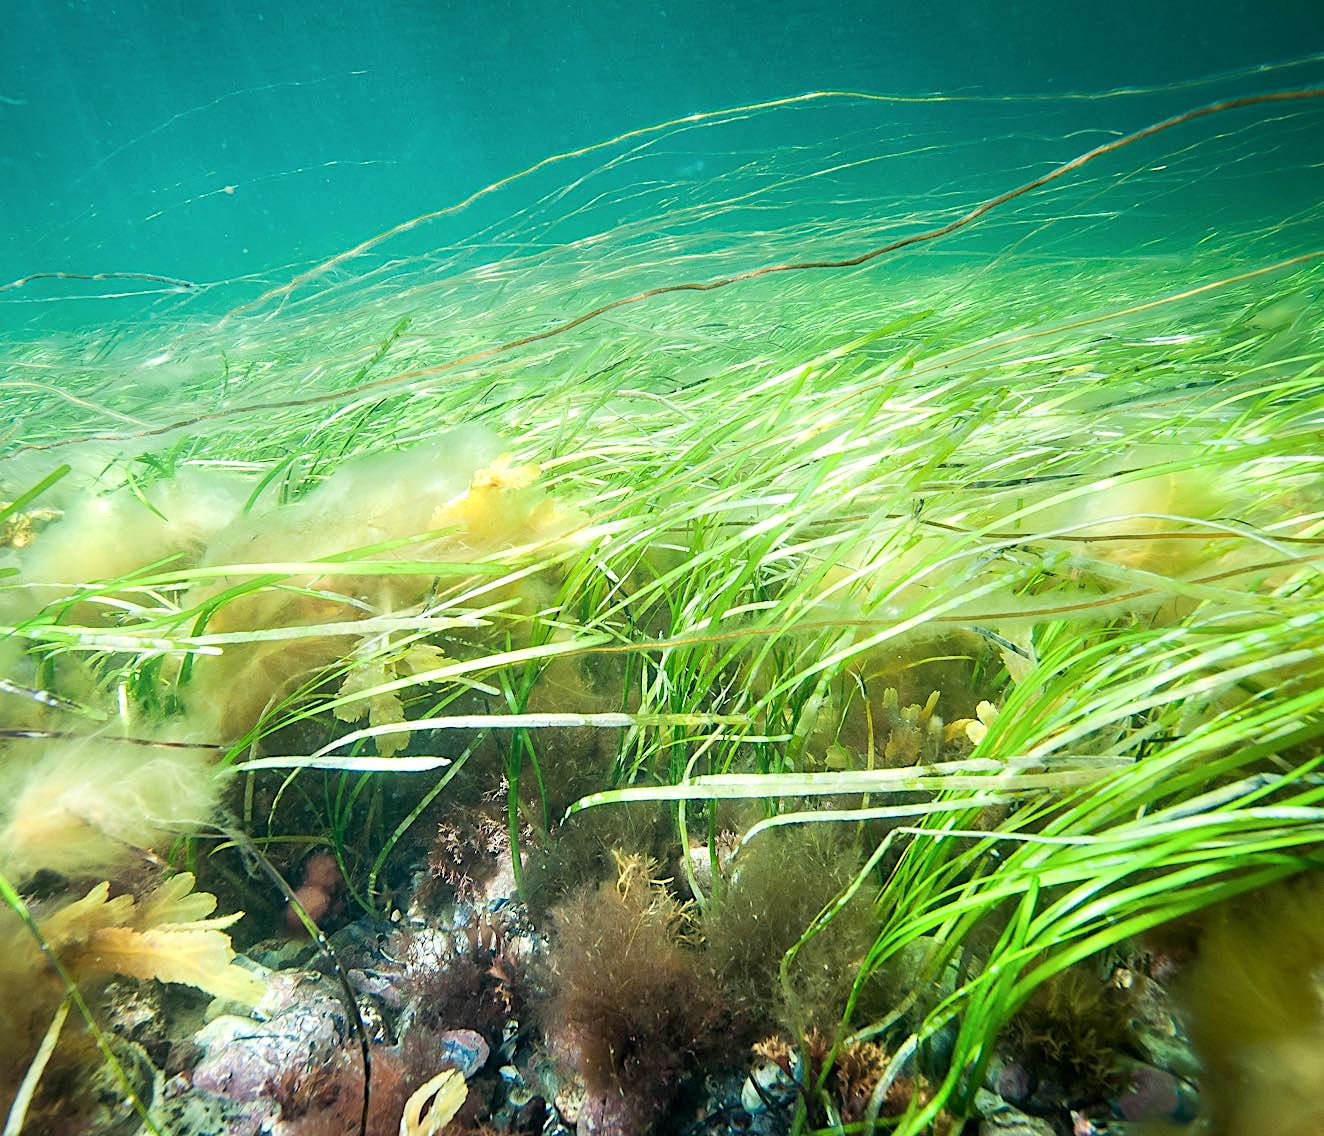 Seagrass Meadow of Zostera Marina with Bend Leaves Due to High Current